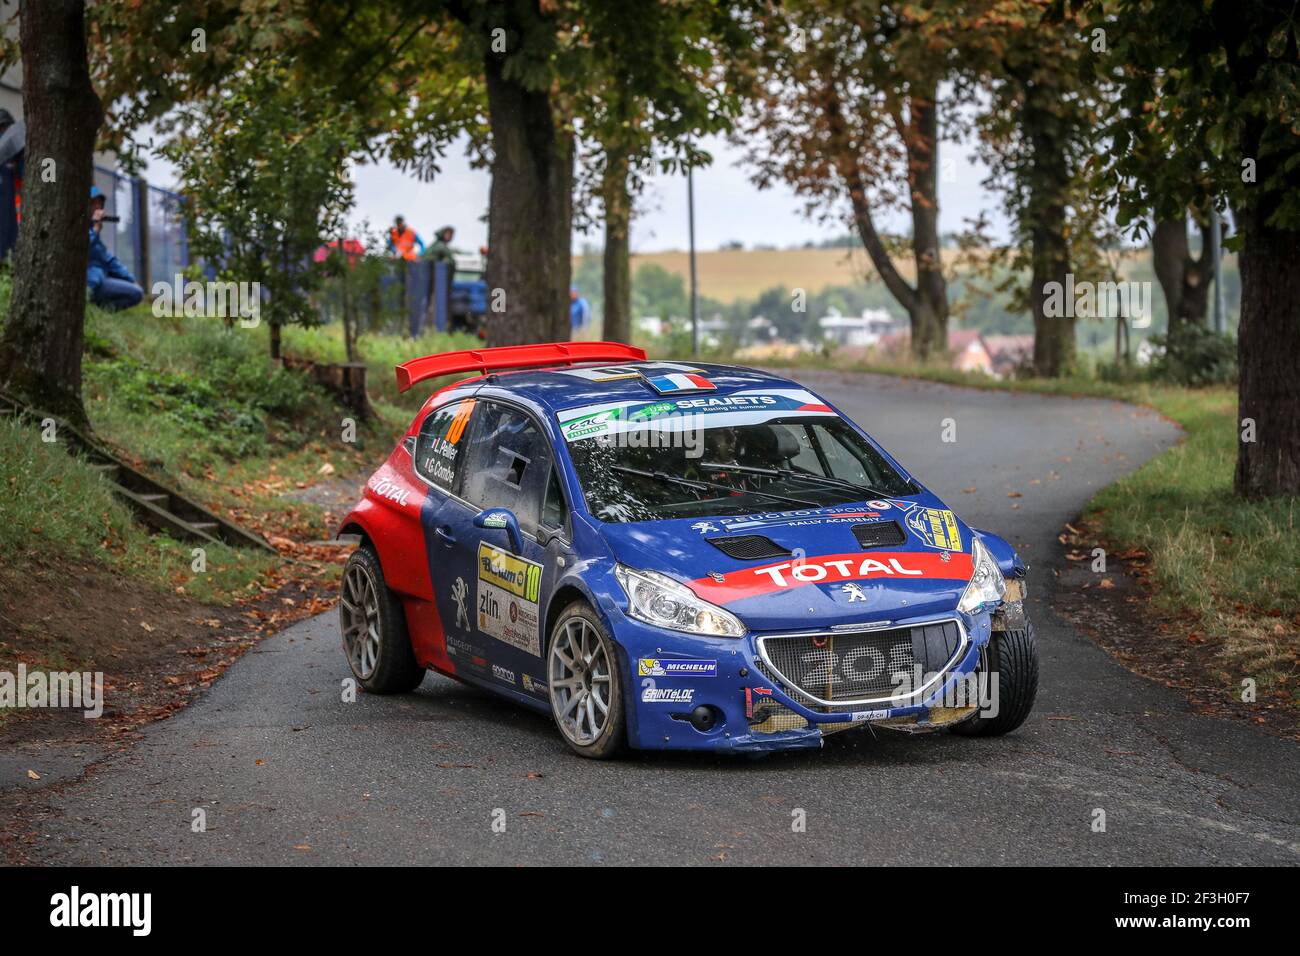 10 Pellier Laurent, Combe Geoffrey, FRA/FRA, Peugeot Rally Academy, Peugeot  208 T16 R5, Action during the 2018 European Rally Championship ERC Barum  rally, from August 24 to 26, at Zlin, Czech Republic -